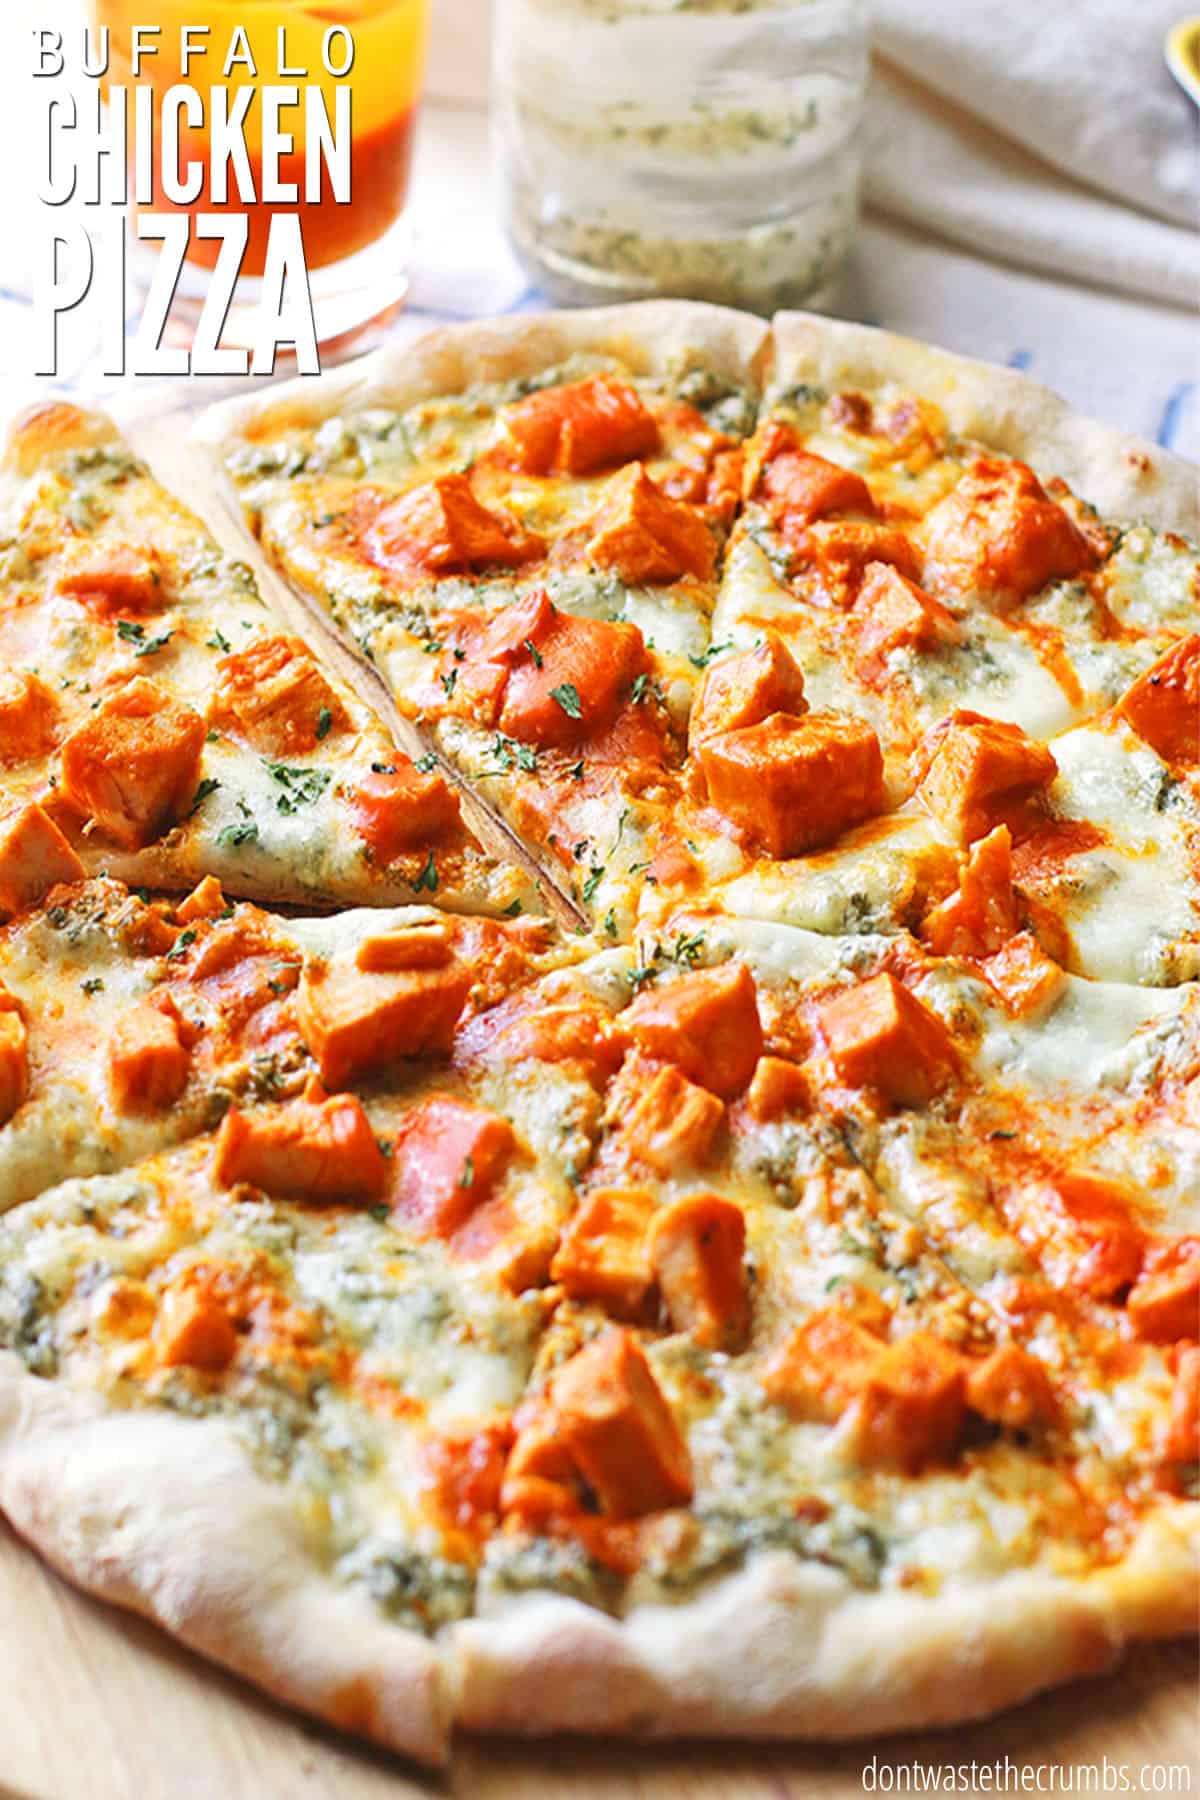 A freshly baked buffalo chicken pizza sliced and ready to eat! The text overlay reads, "Buffalo Chicken Pizza."